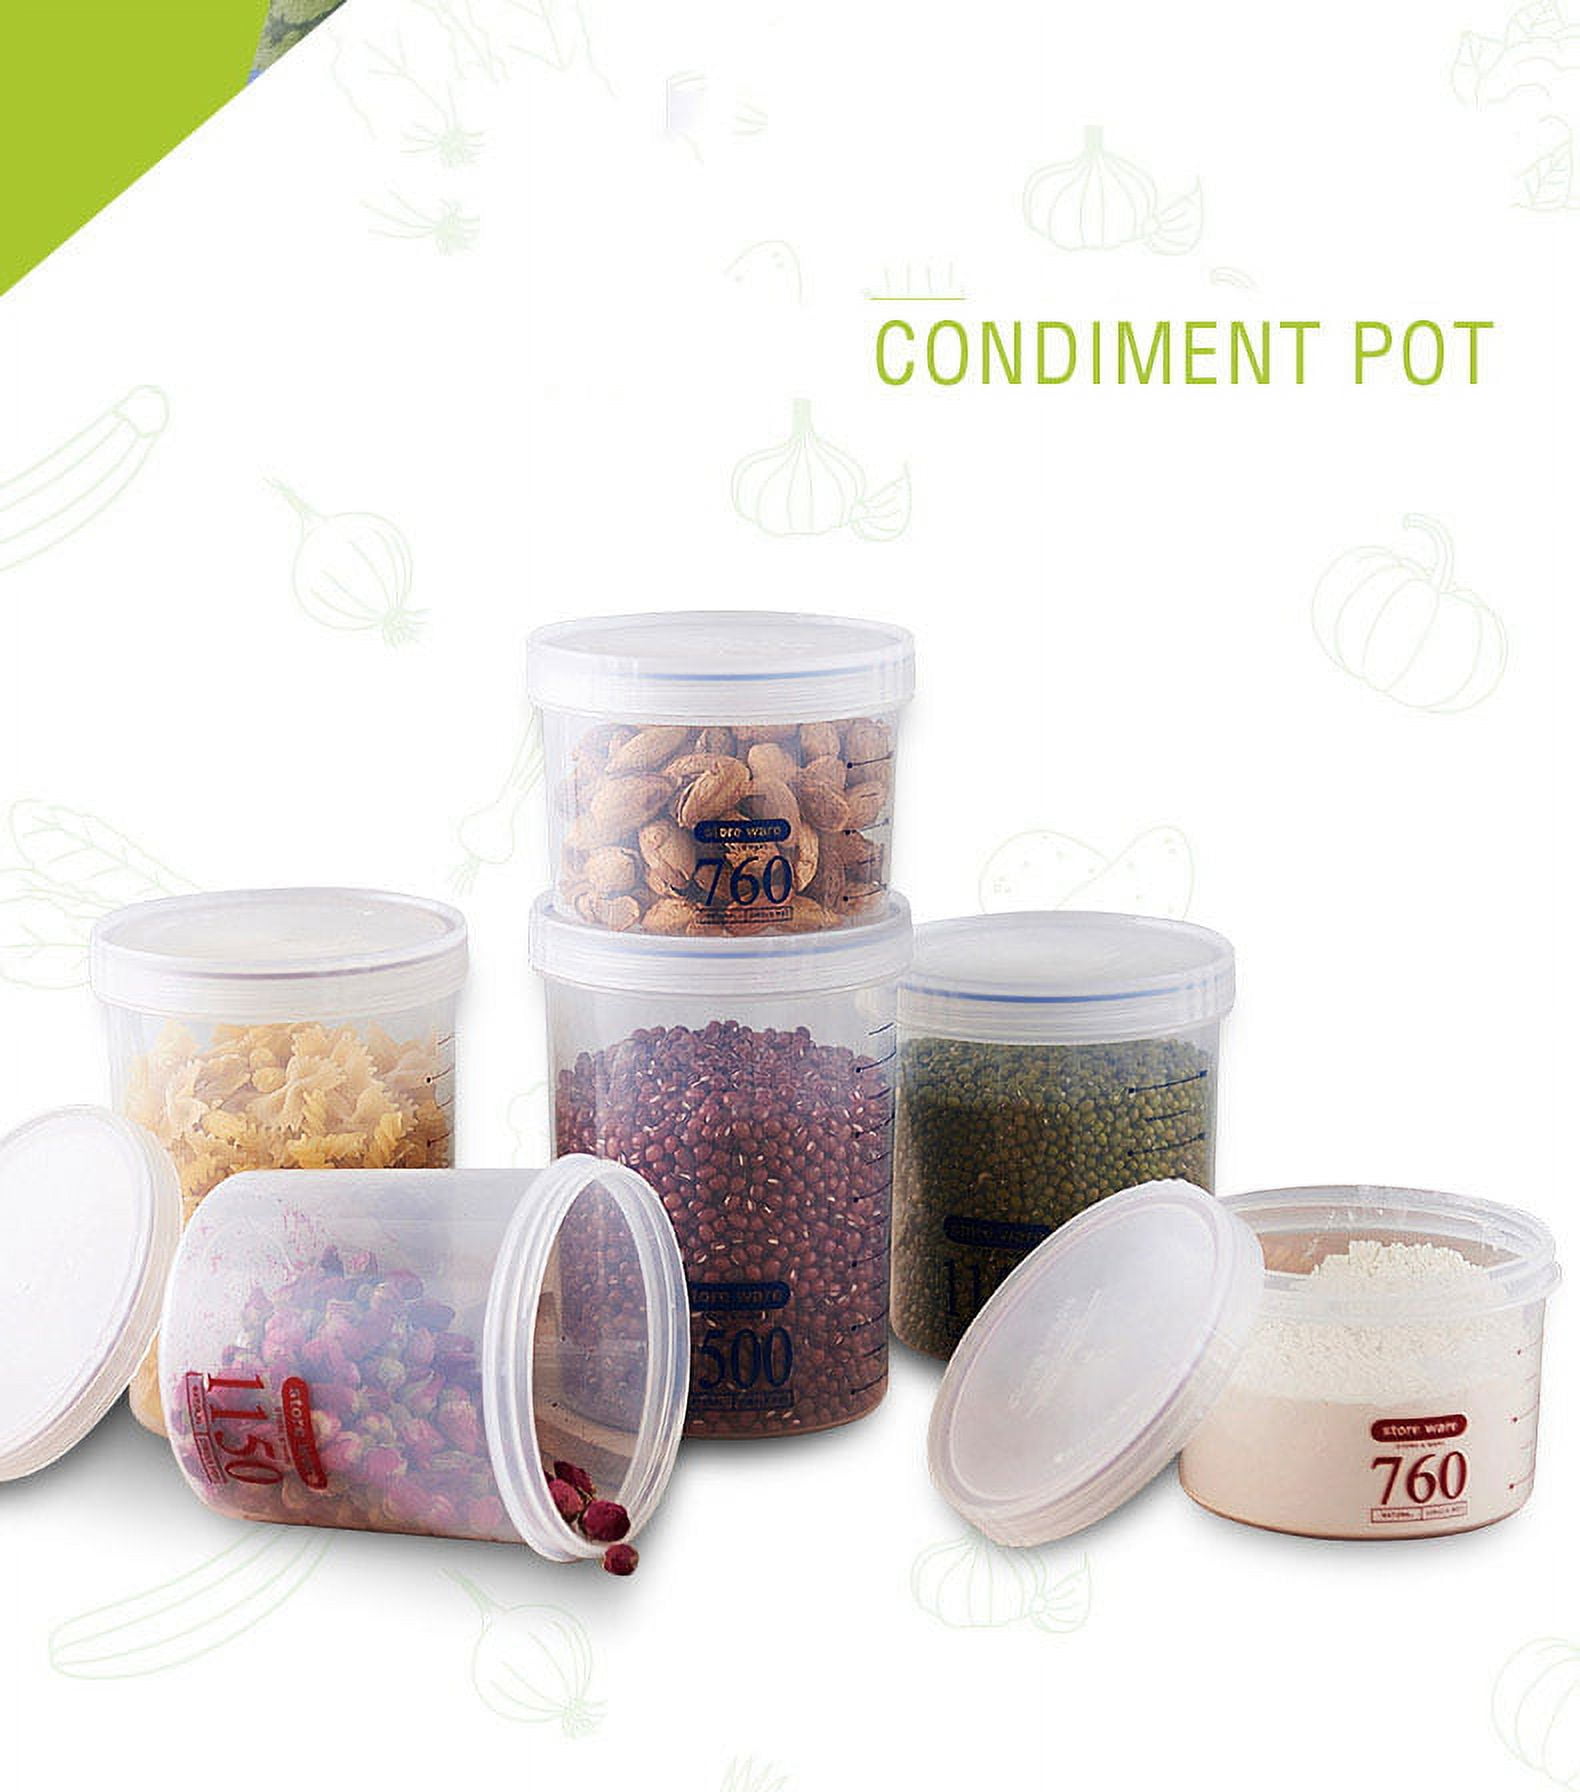 JMH 3 Pcs Air-Tight Storage Containers- Pantry Durable Seal Pot